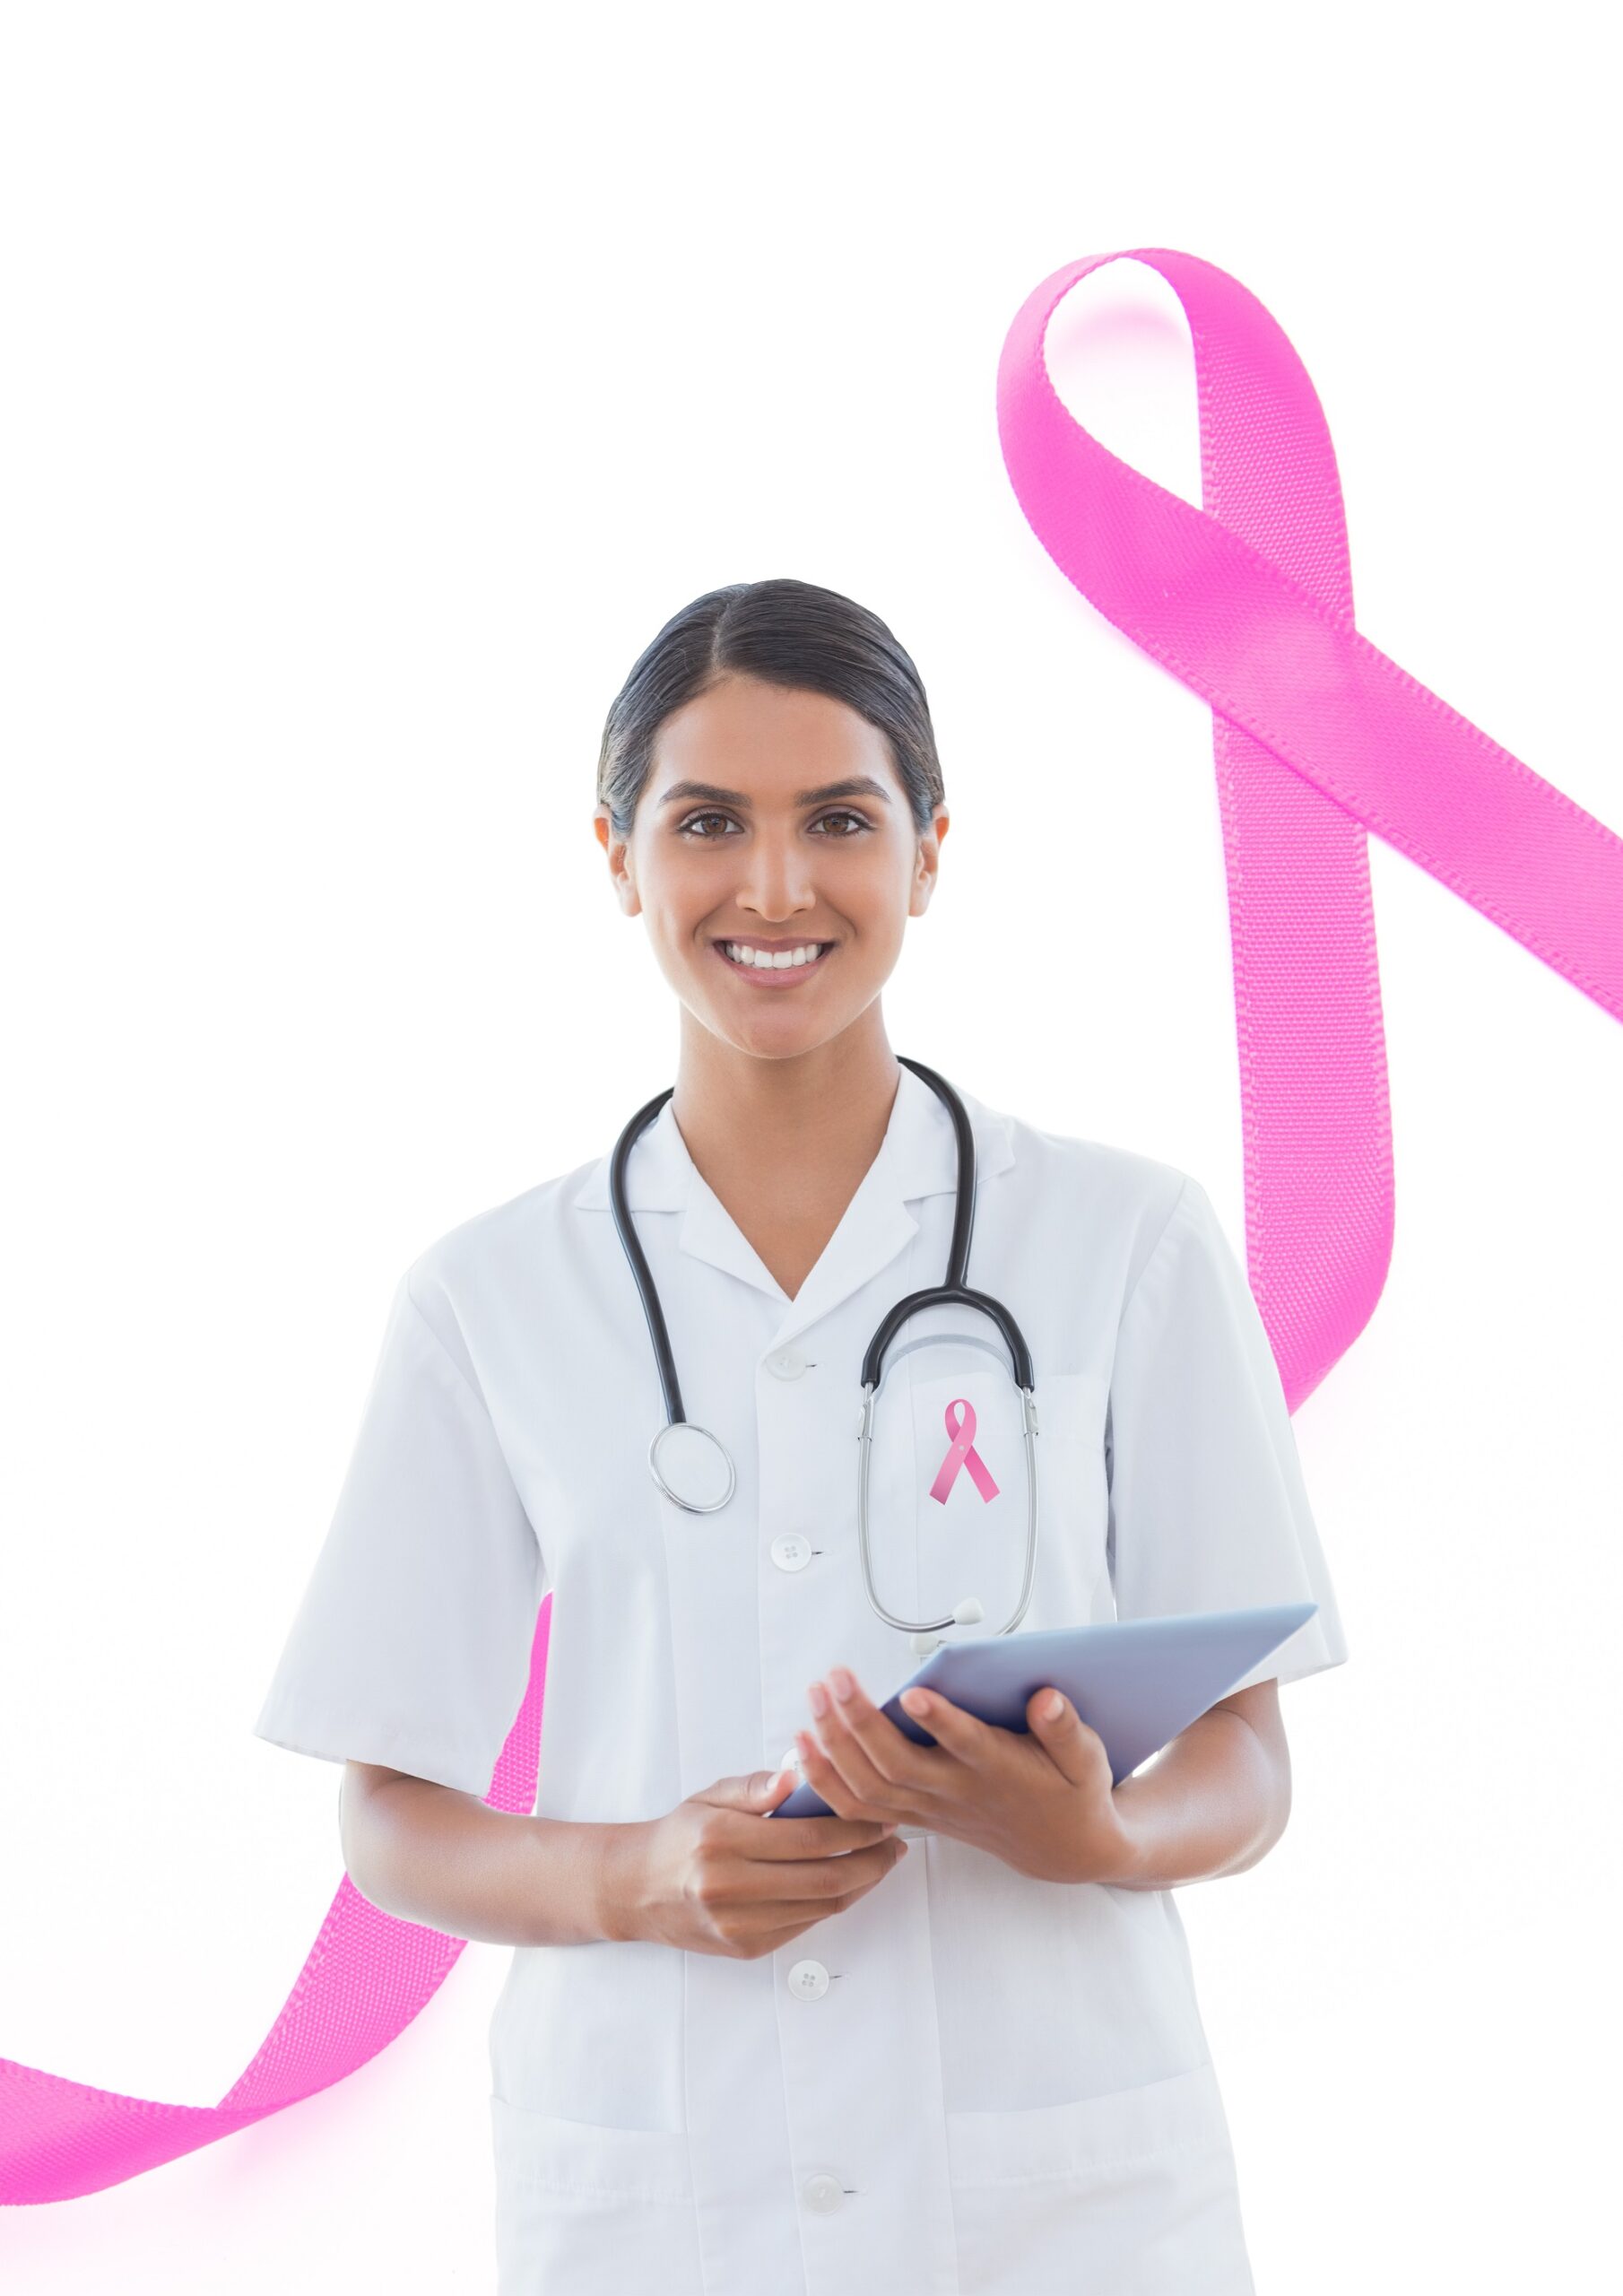 Digital composite of Doctor woman with breast cancer awareness ribbon